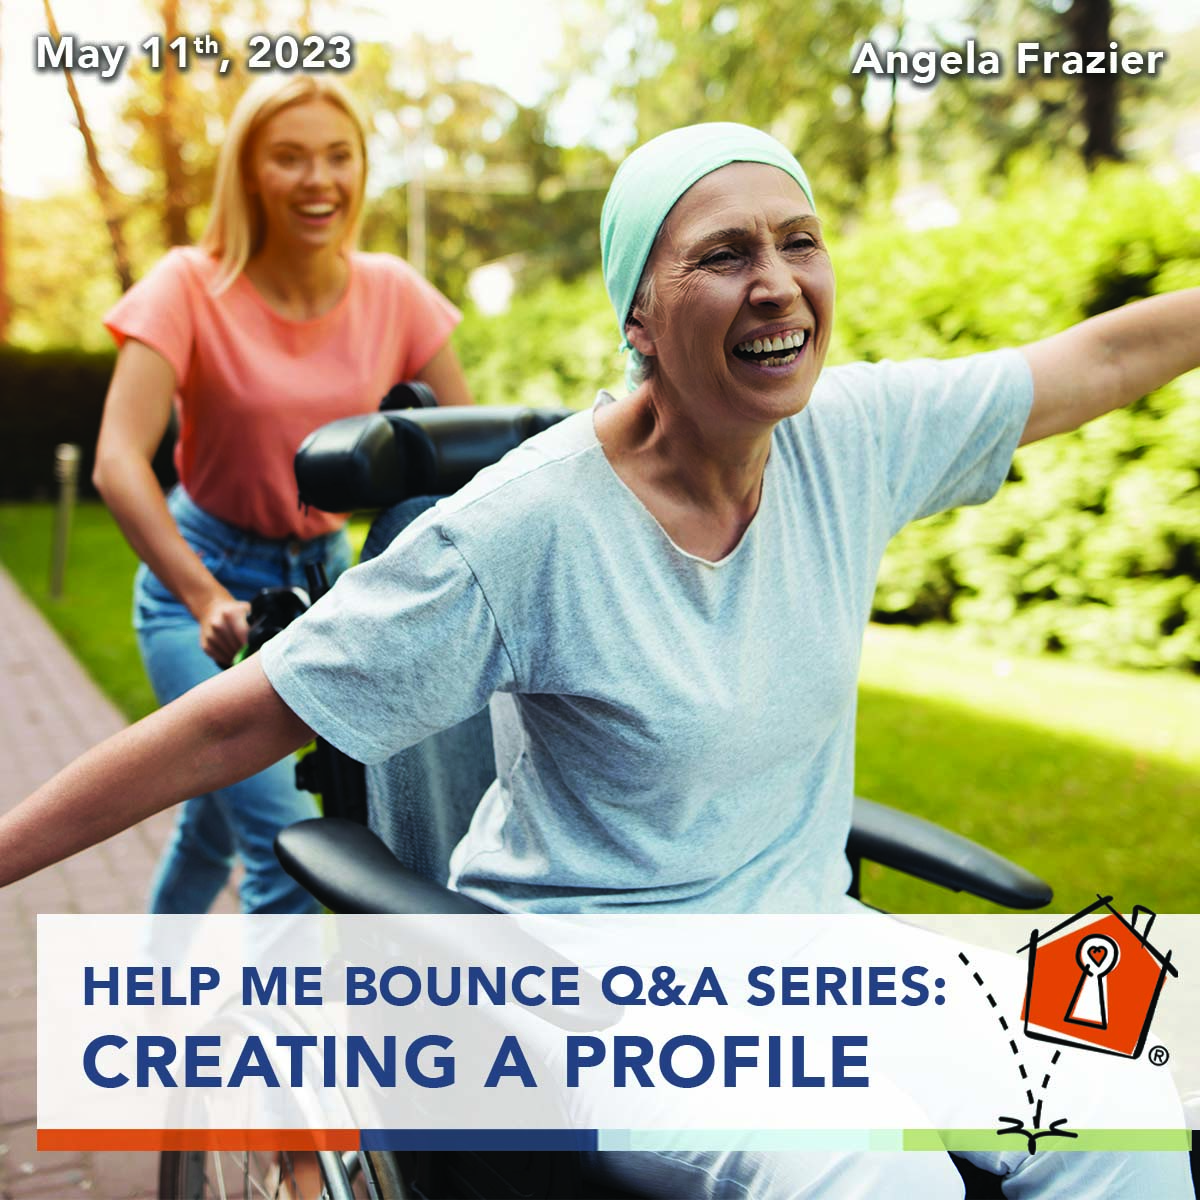 Creating a profile on Help Me Bounce